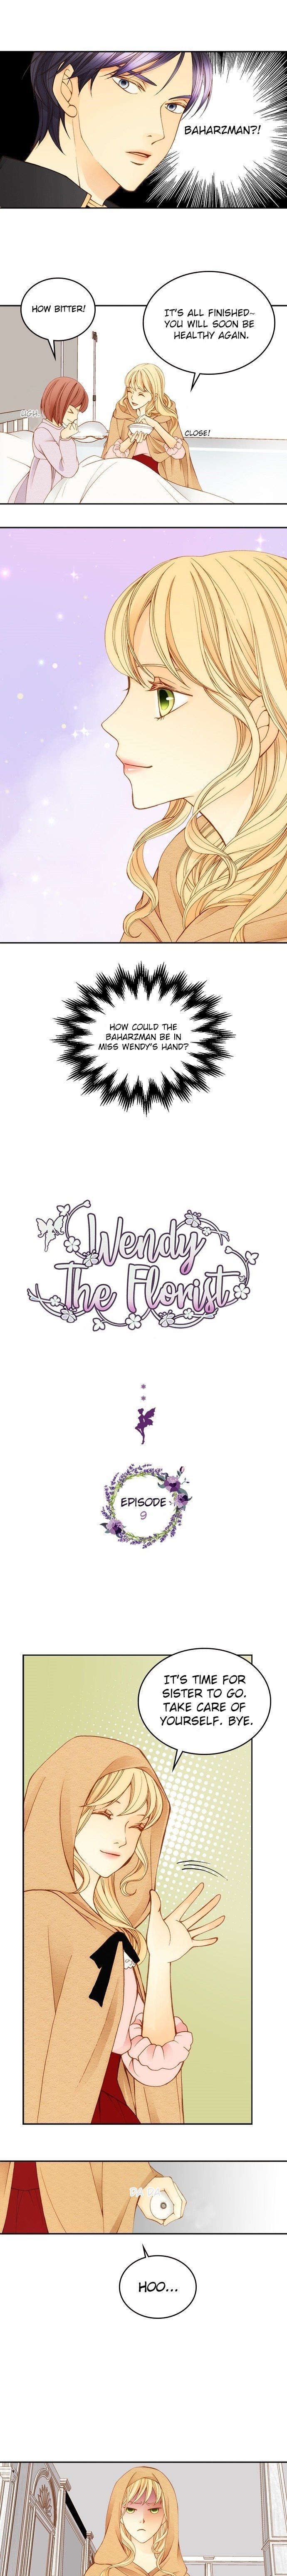 Wendy The Florist Chapter 9 page 1